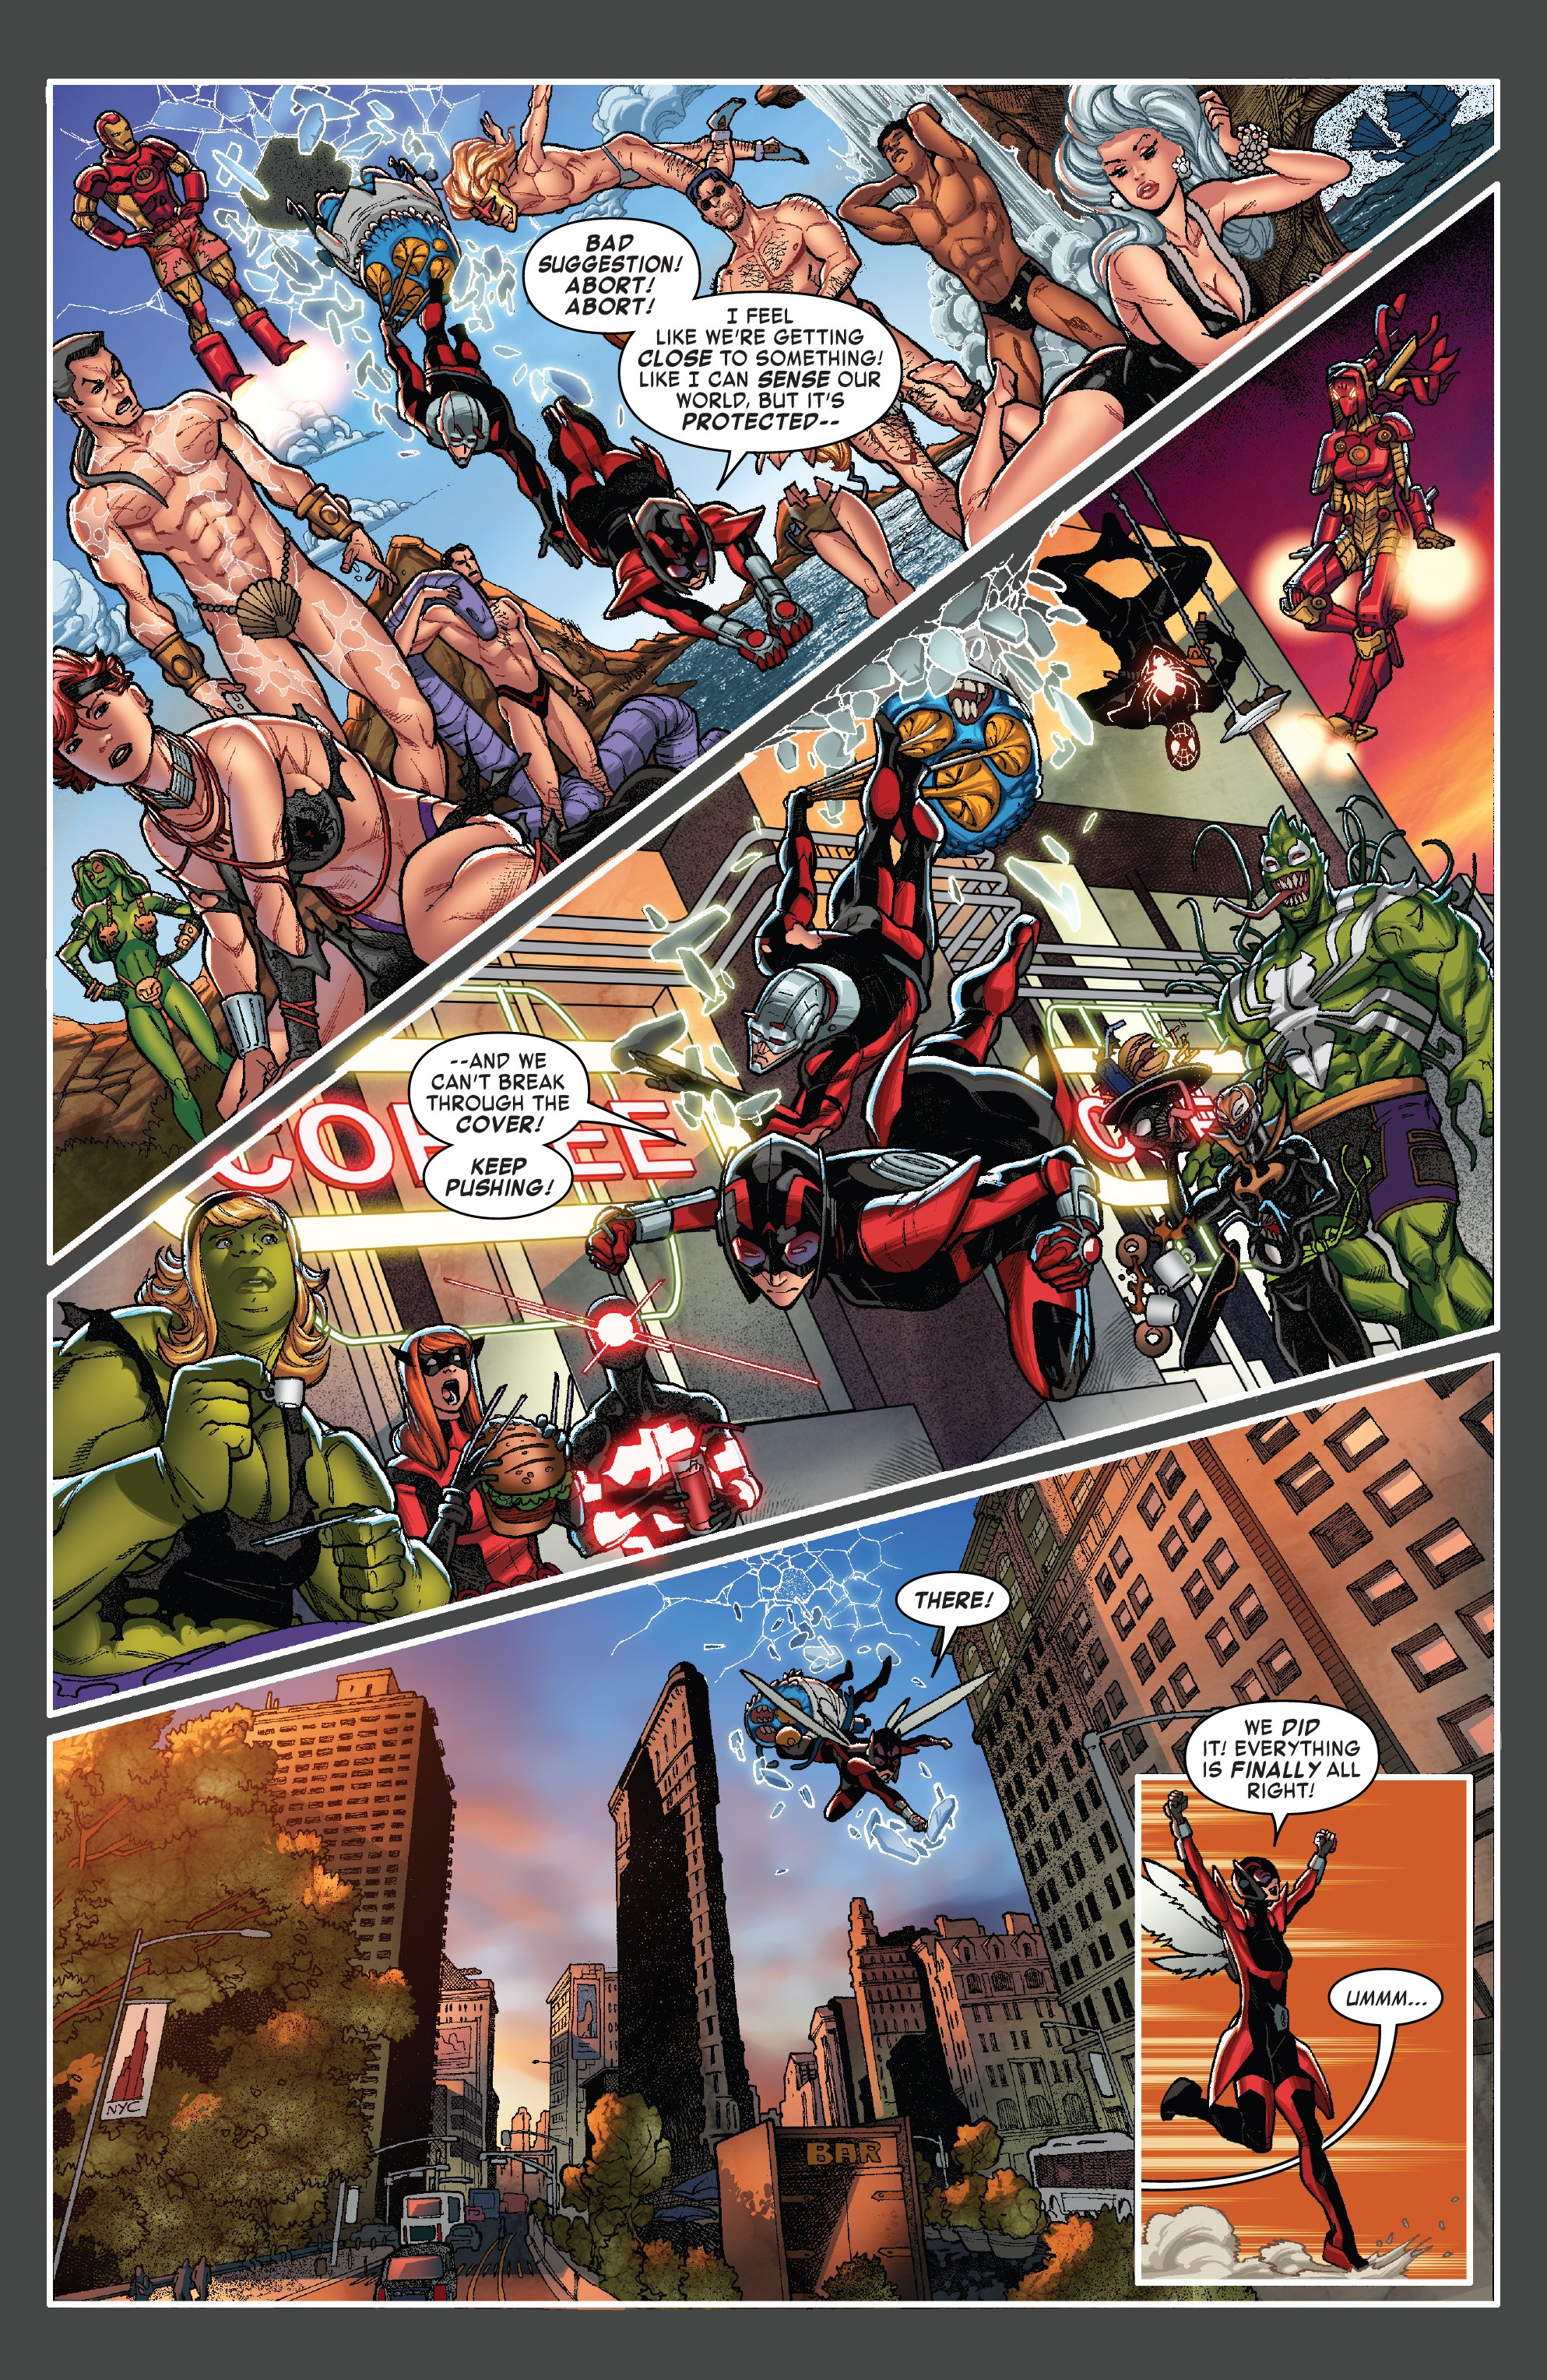 Ant-Man & the Wasp (2018) #1, Comic Issues